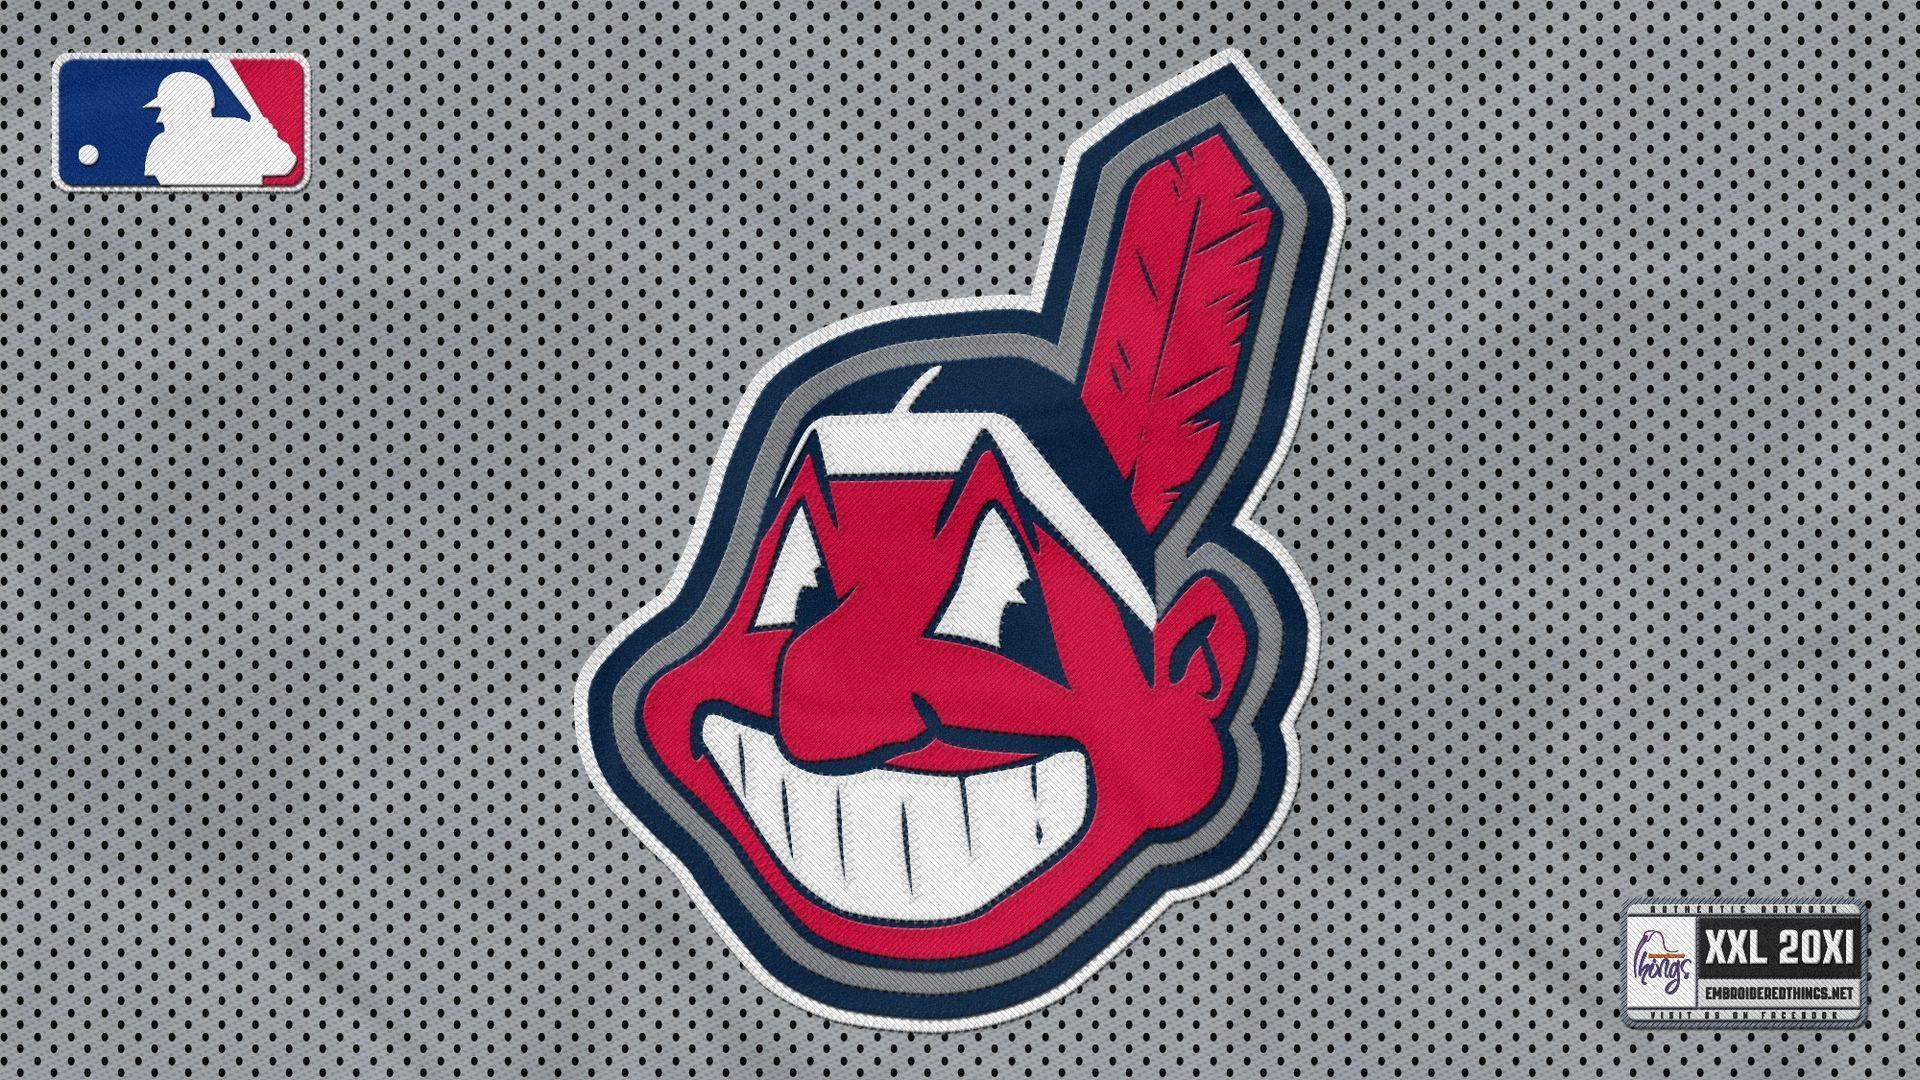 Wallpaper.wiki Cleveland Indians Wallpaper Full HD PIC WPC005957